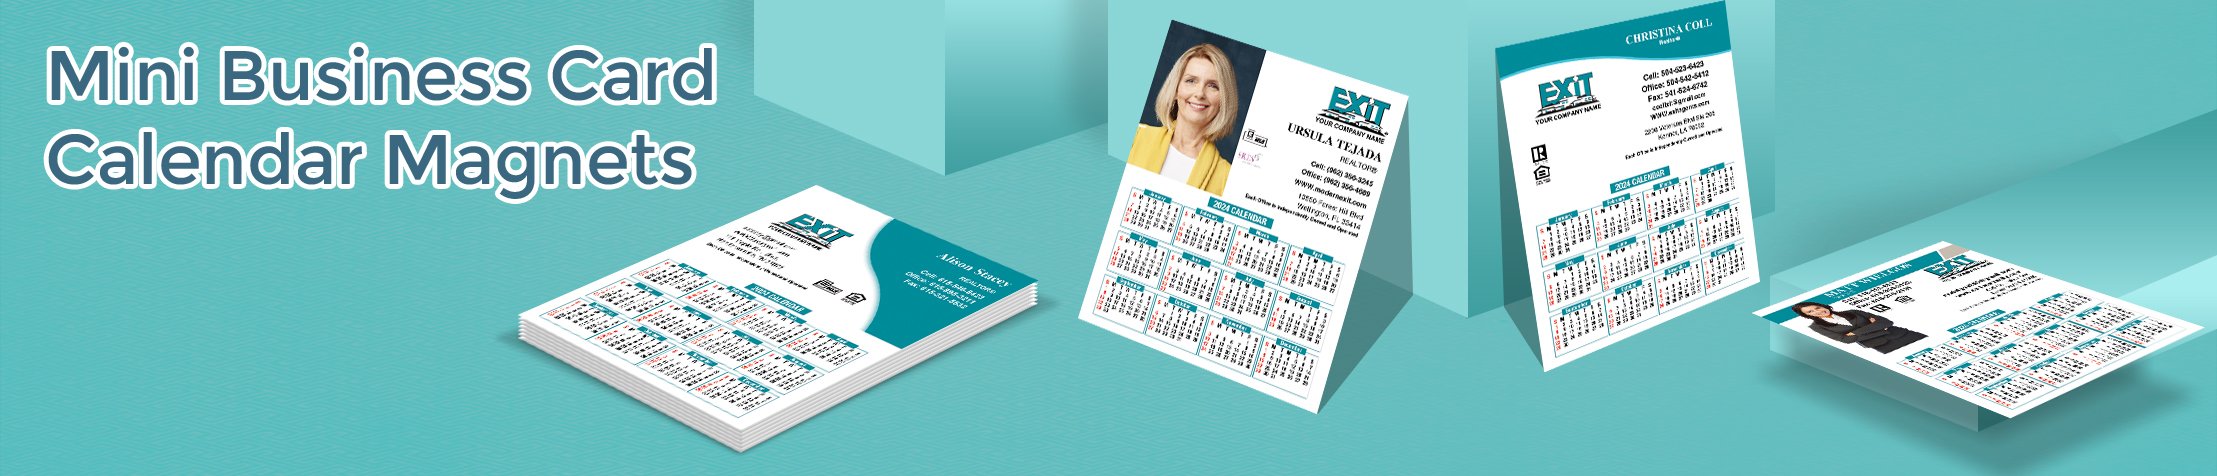 Exit Realty Mini Business Card Calendar Magnets - Exit Realty approved vendor personalized marketing materials | BestPrintBuy.com